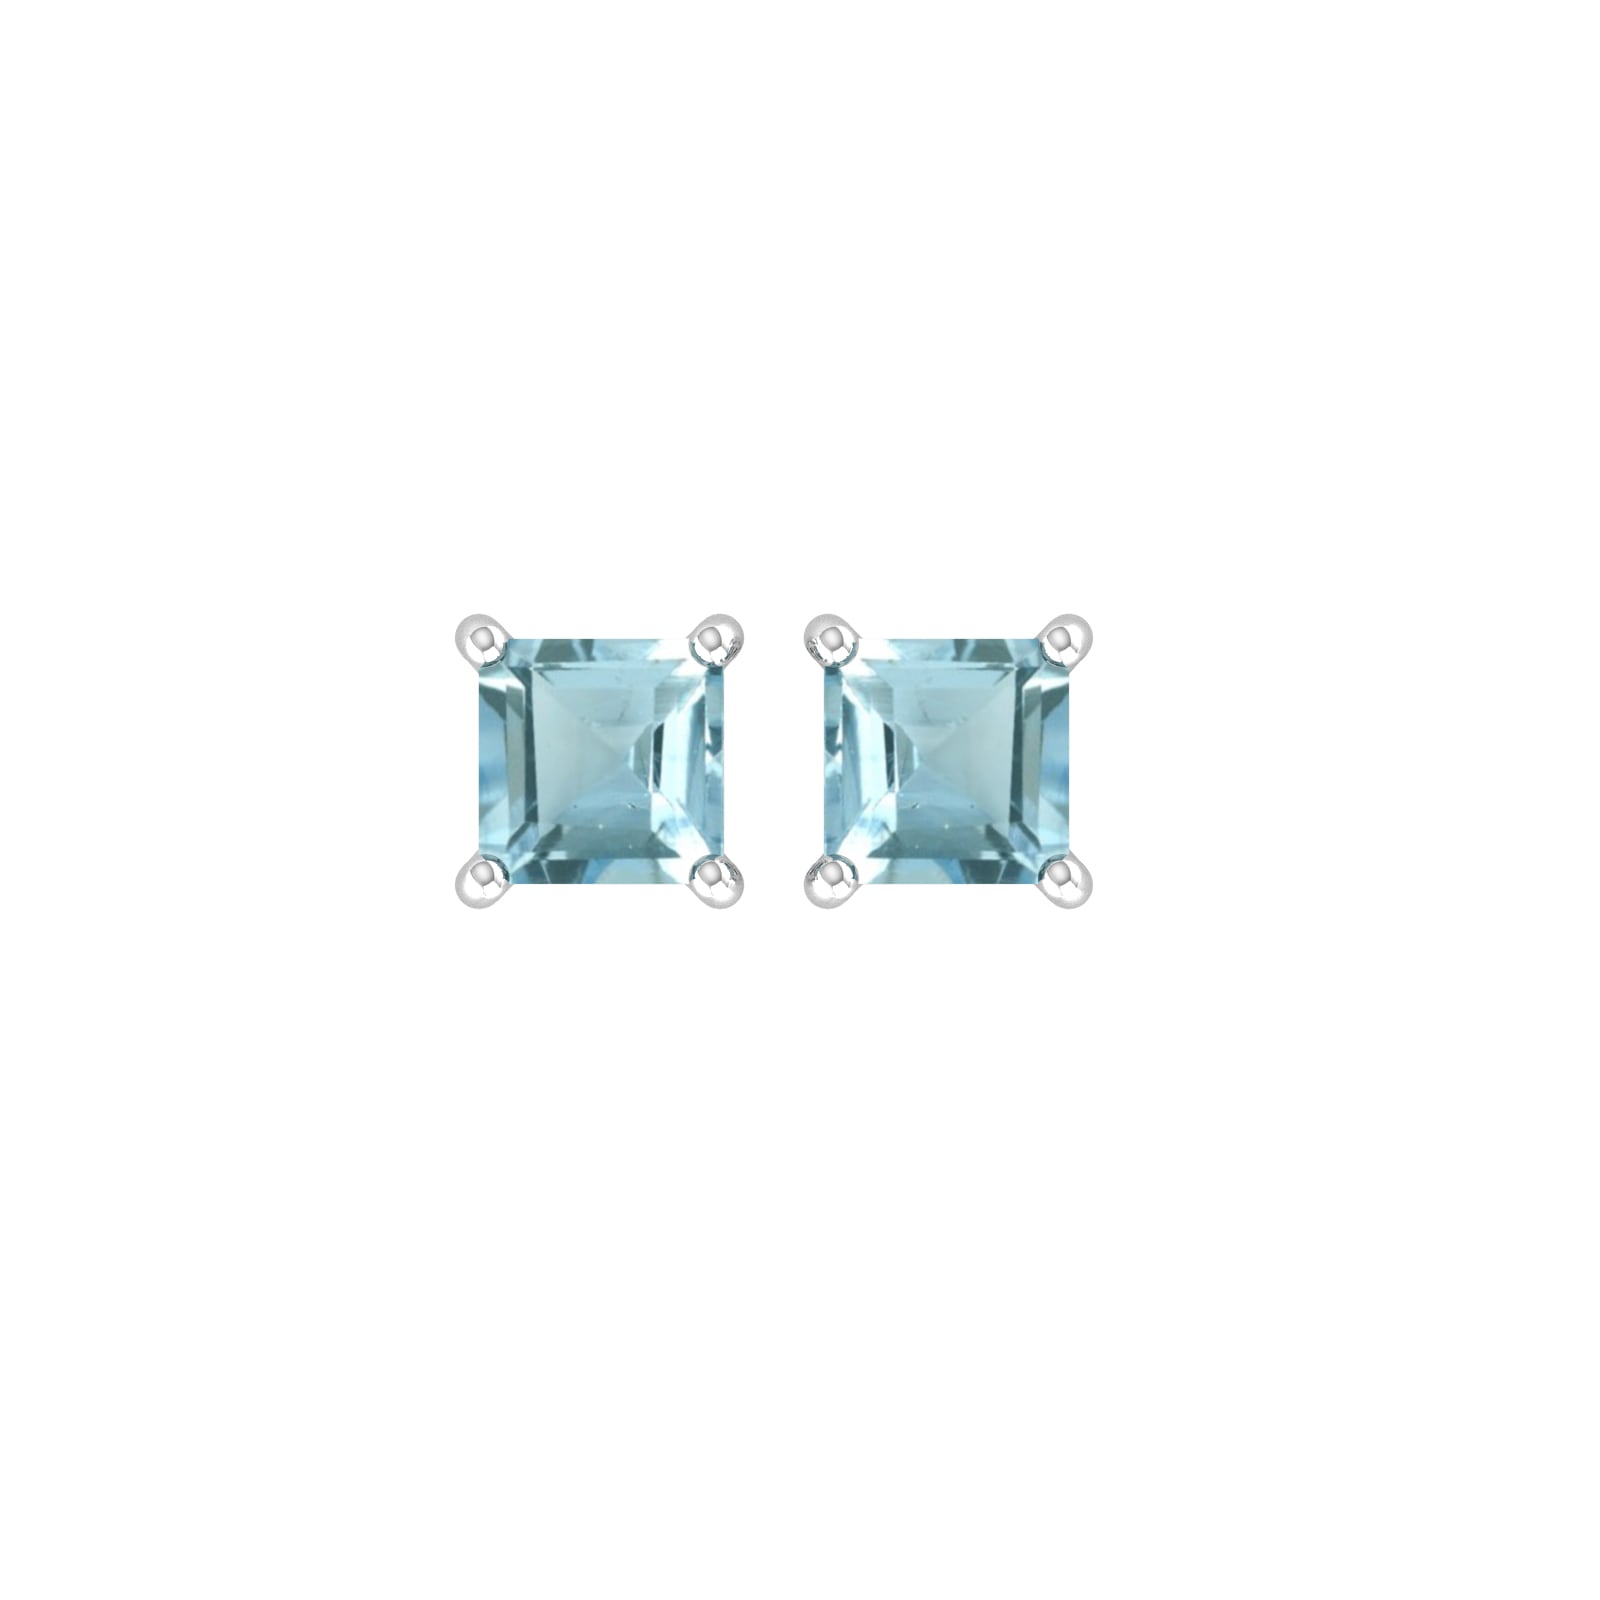 9ct White Gold 4 Claw Square Aquamarine 5mm x 5mm Stud Earrings